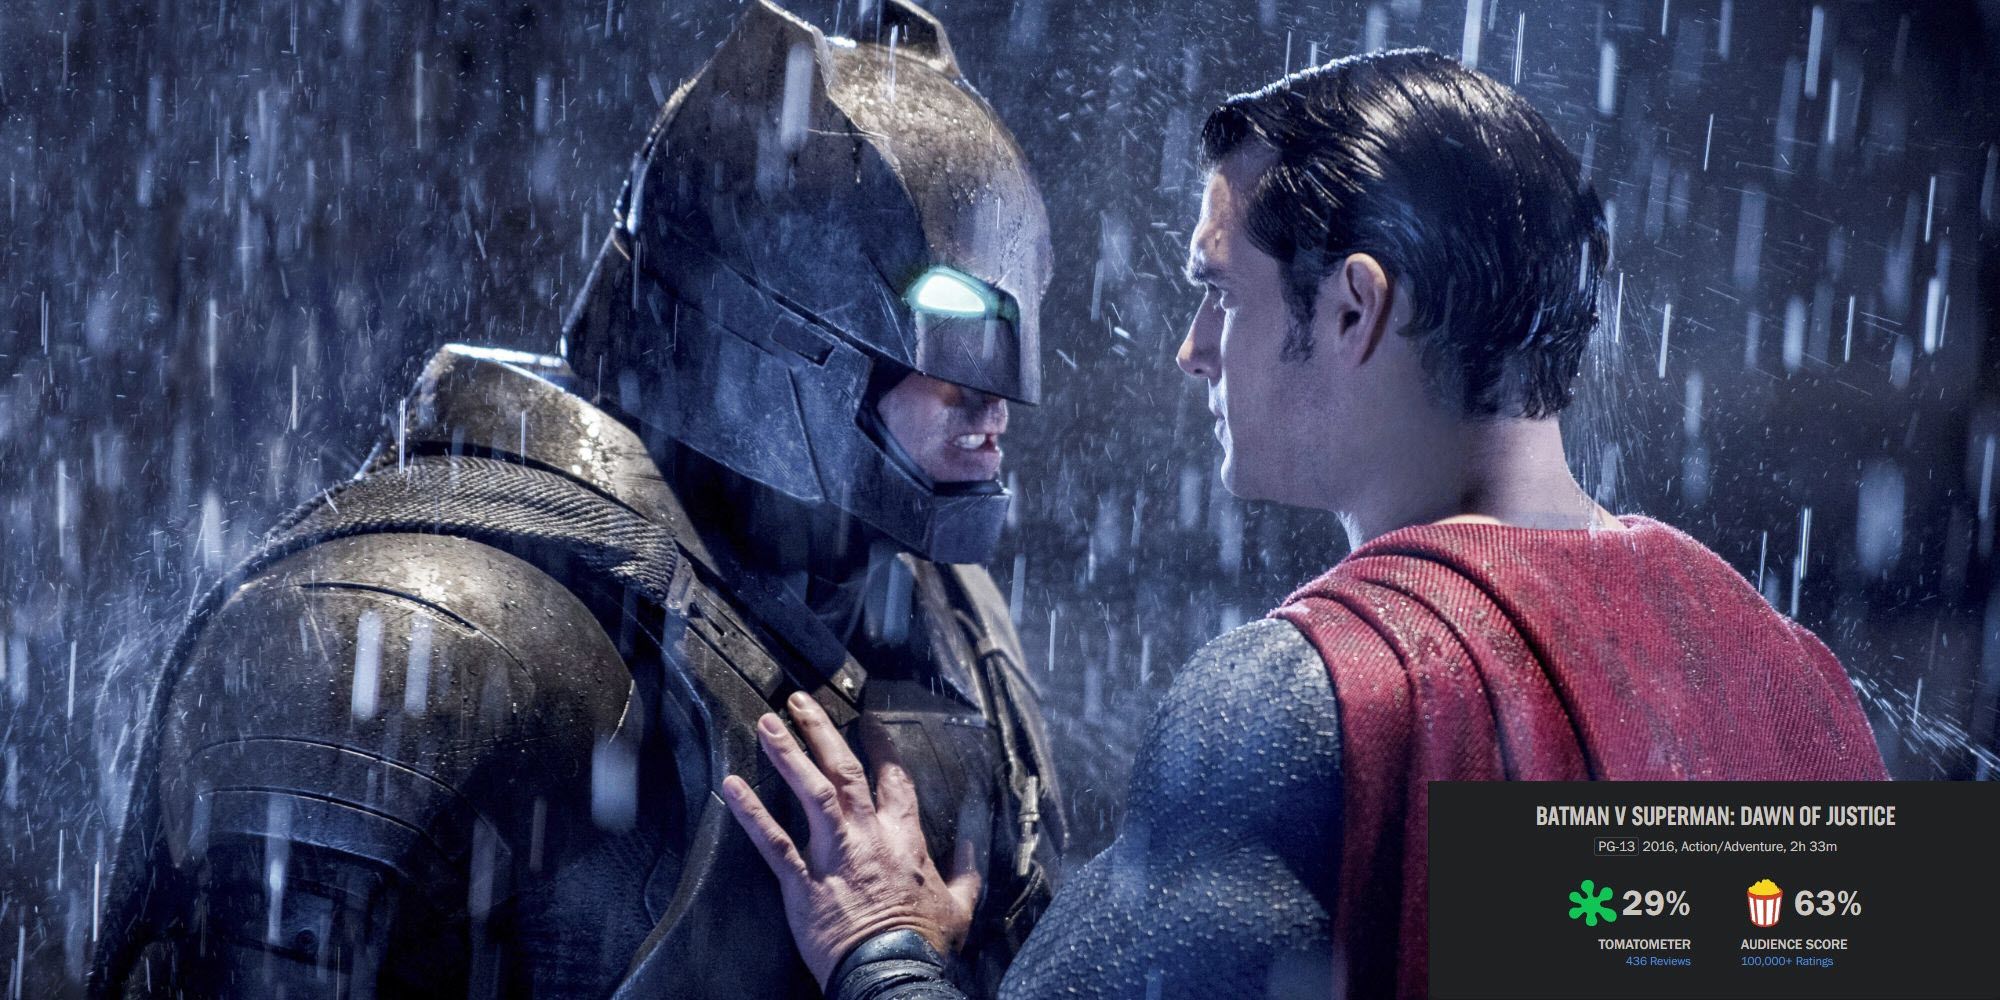 image from Batman V Superman Dawn Of Justice featuring Ben Affleck and Henry Cavill in character